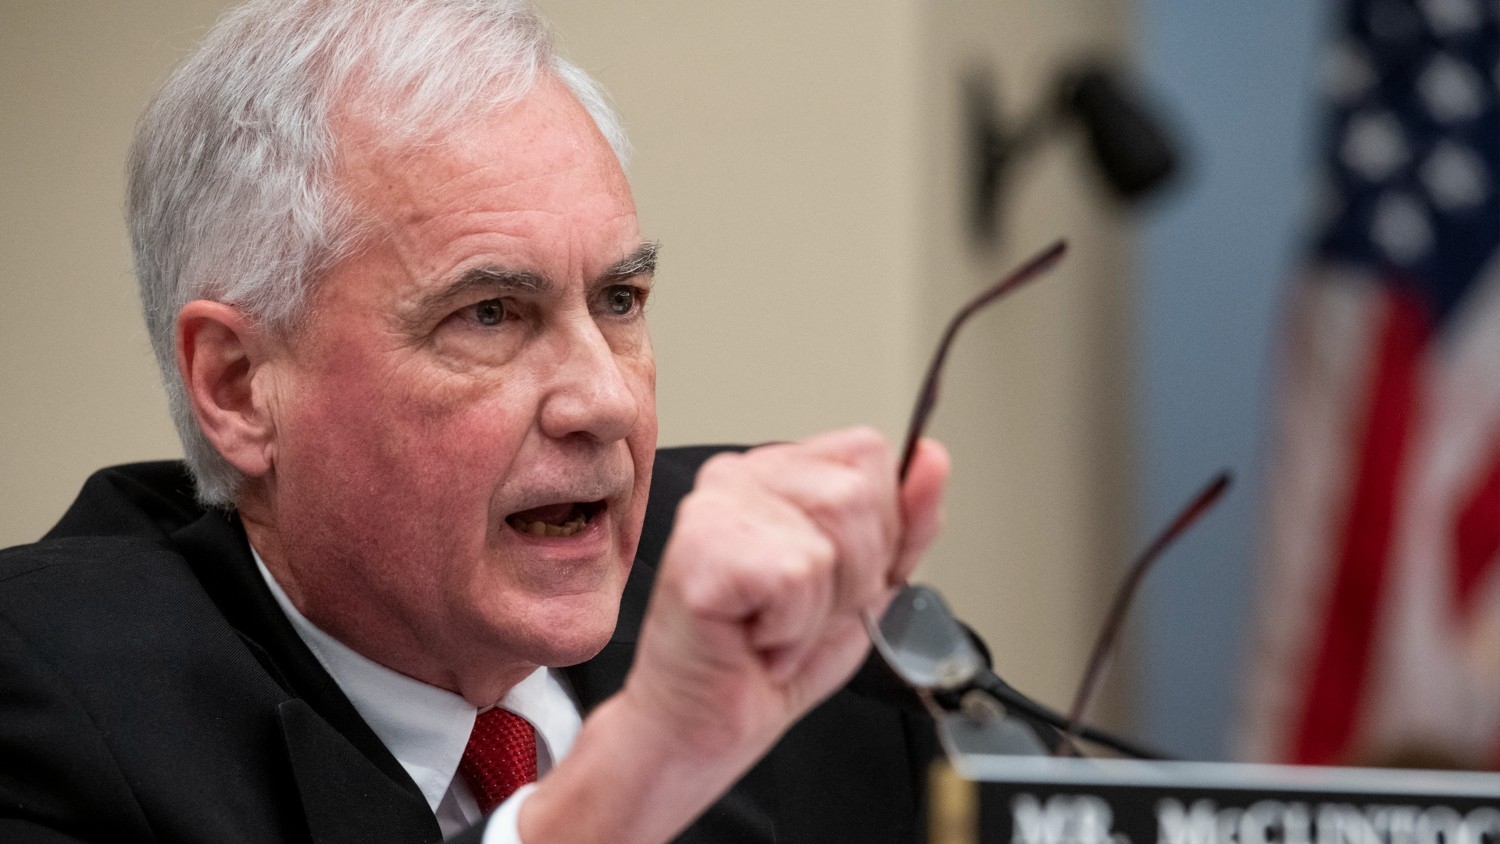 US Congressman Tom McClintock questions Office of Management and Budget Director Shalanda Young during a budget committee hearing on 29 March 2022 in Washington.